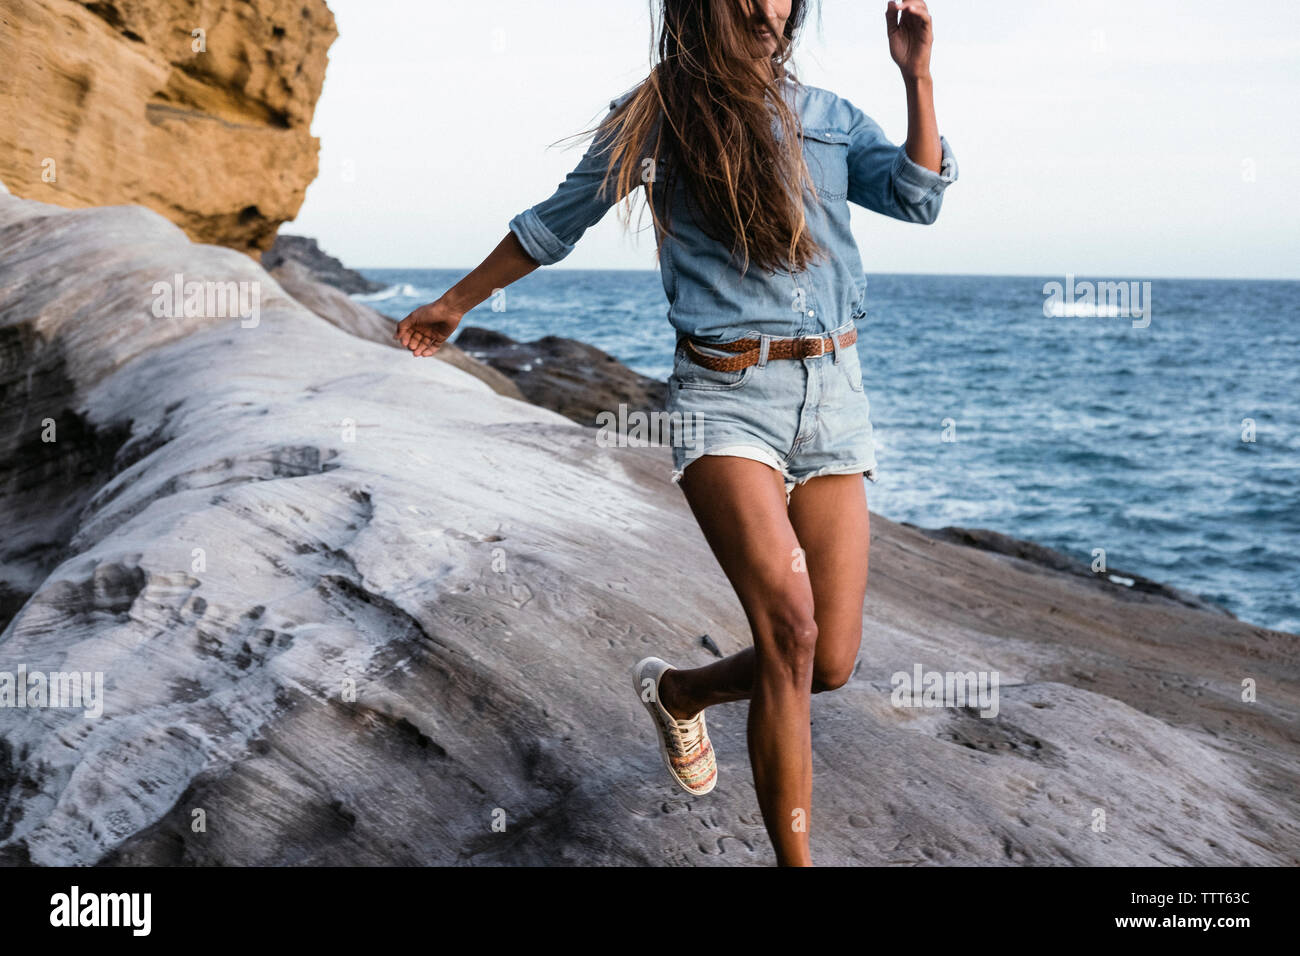 Close up of a woman running on rock formations with sea in background Stock Photo